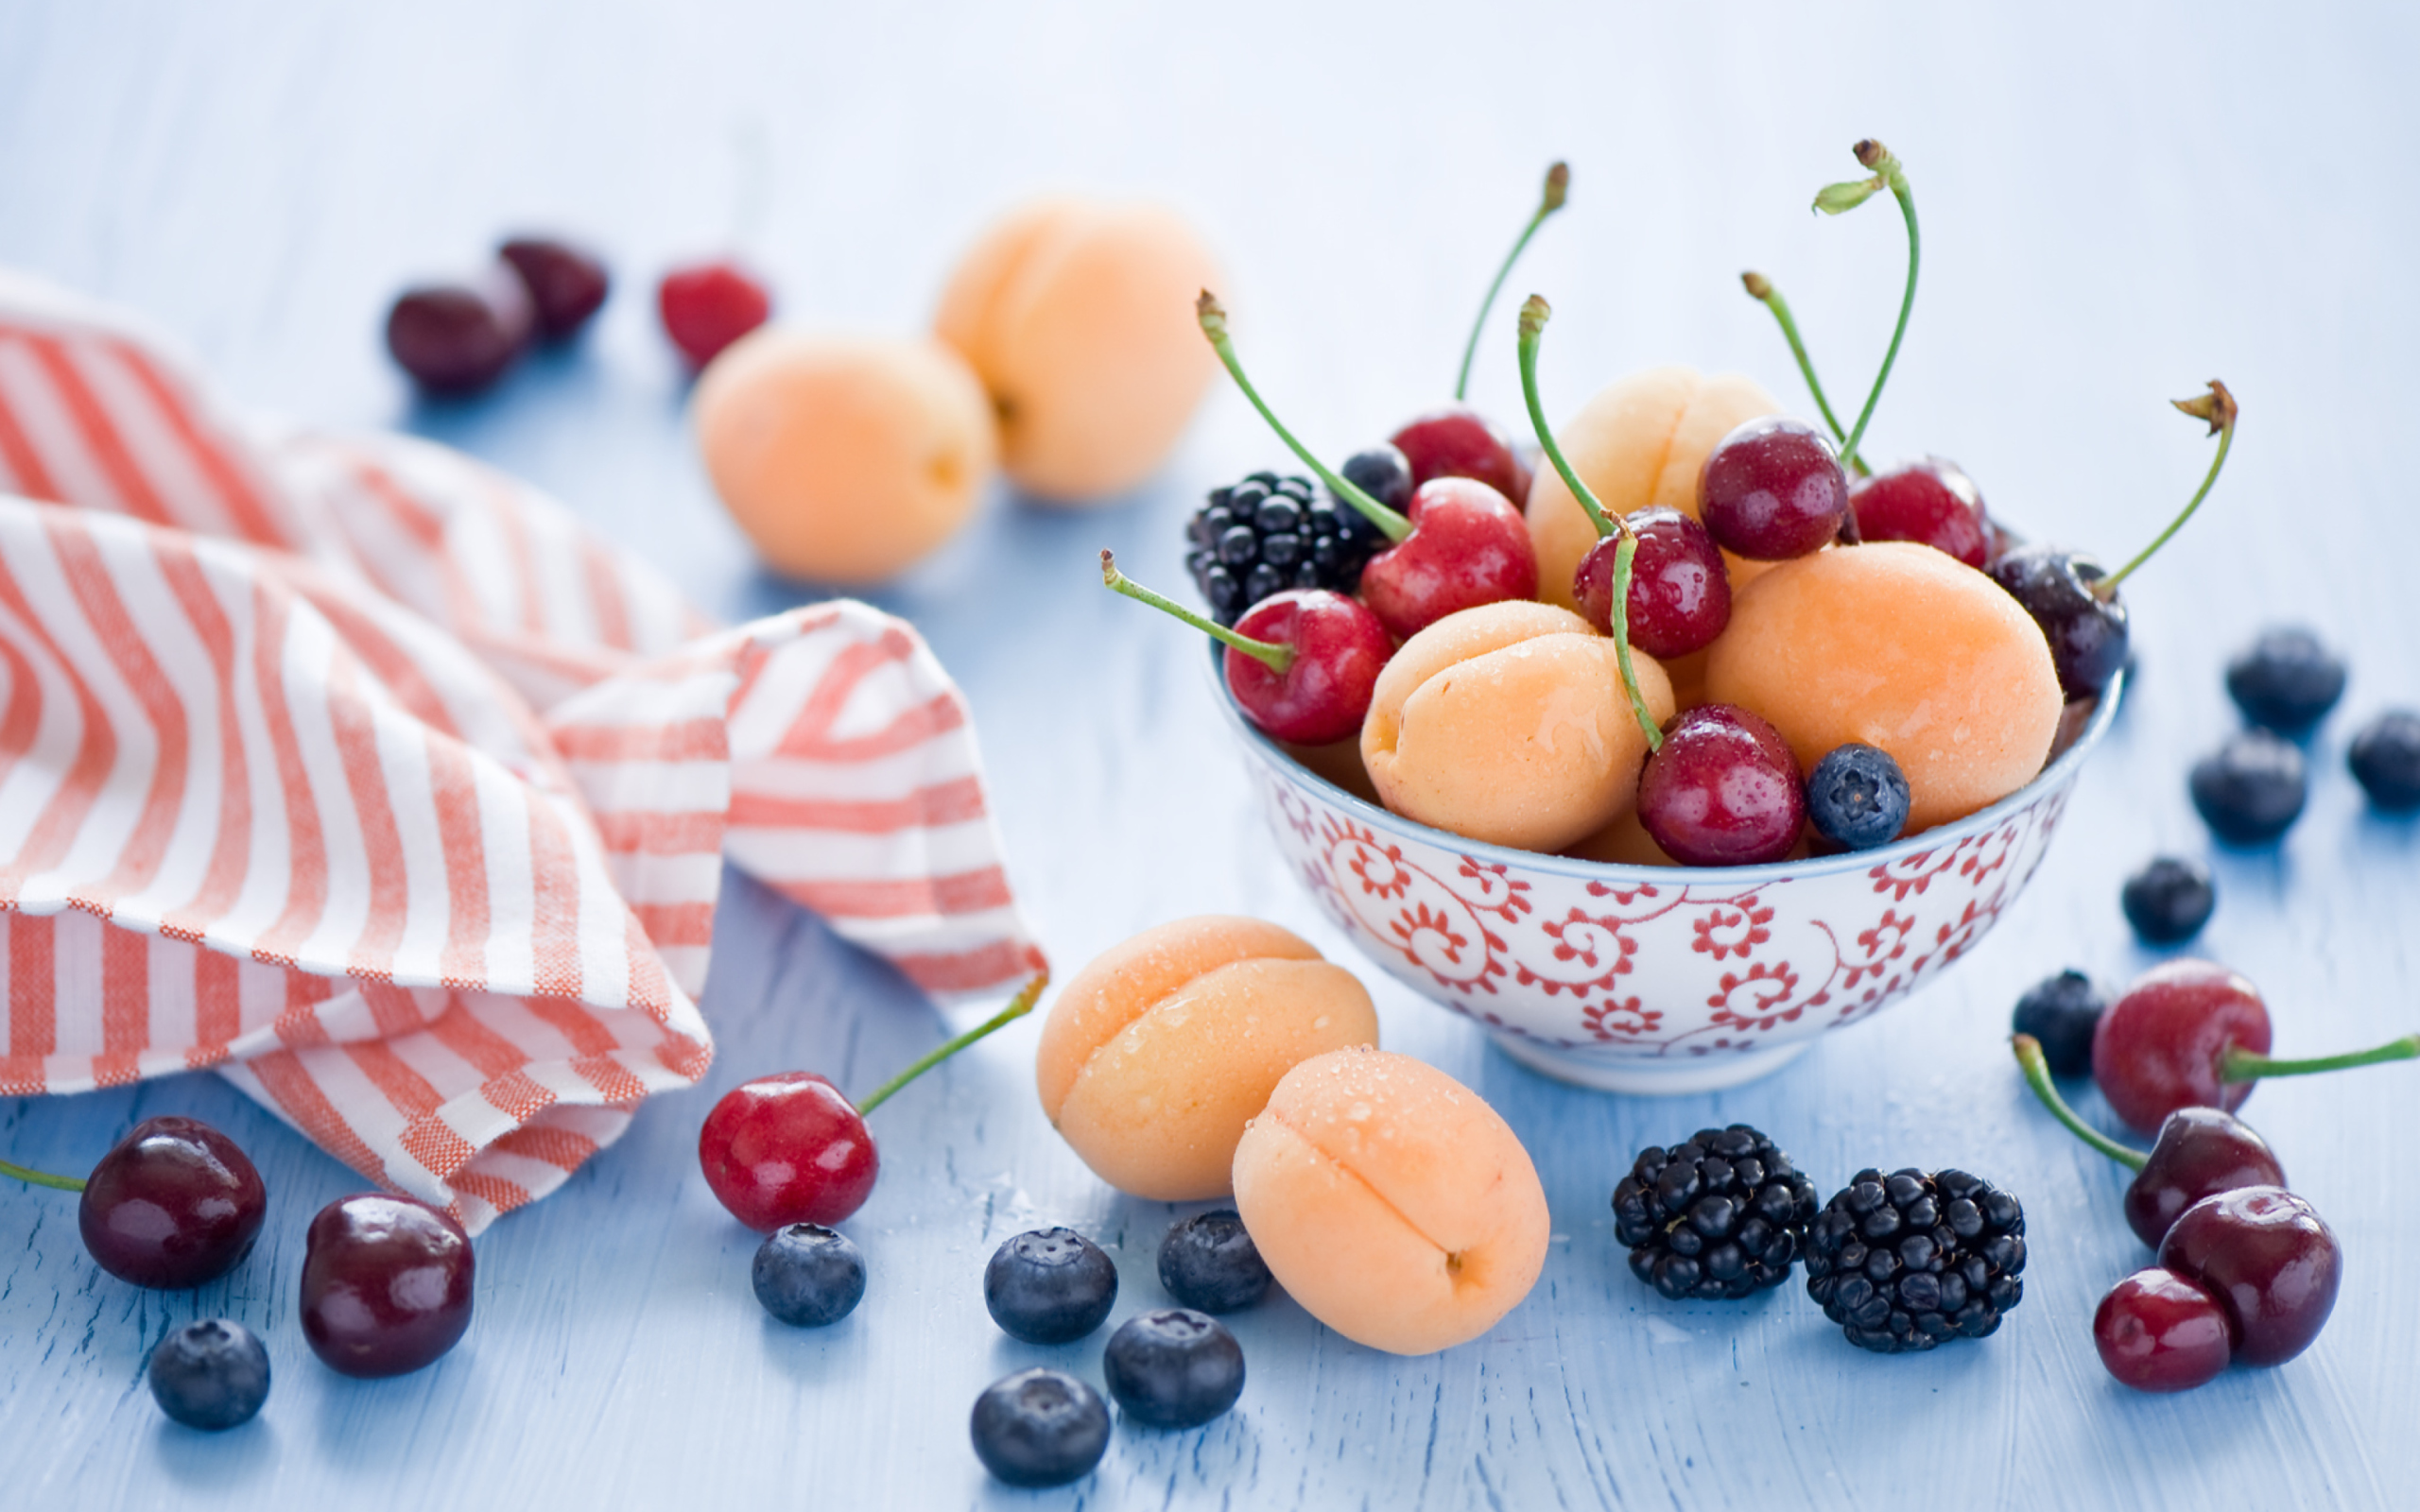 Plate Of Fruits And Berries wallpaper 2560x1600